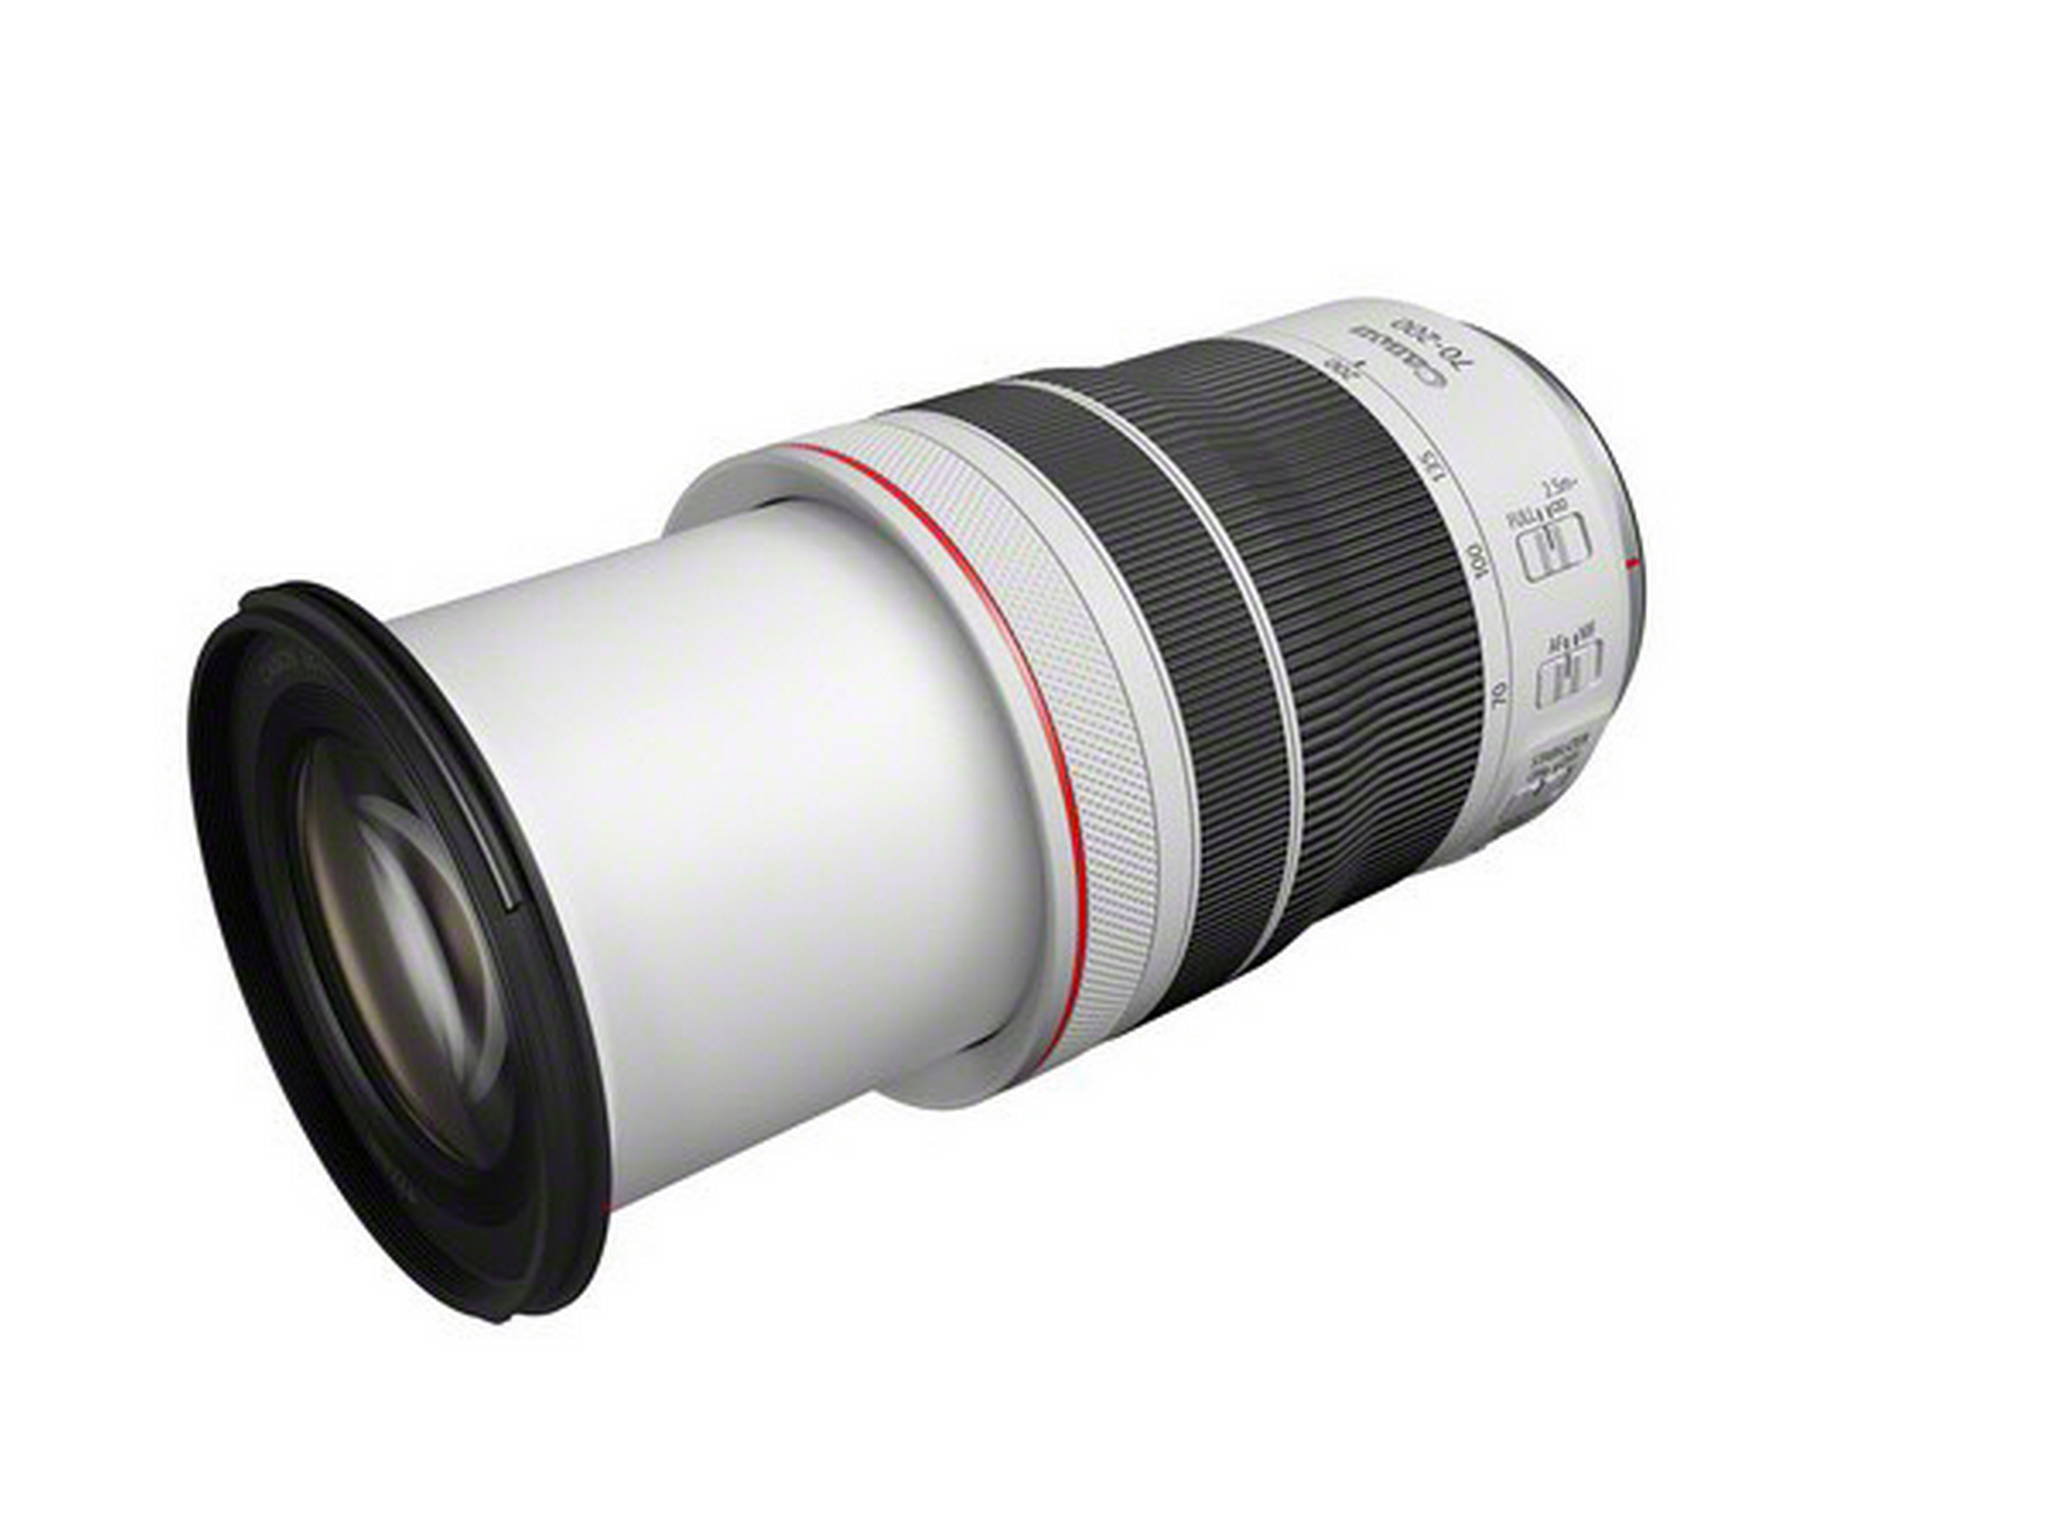 Canon Lens RF 70-200mm F4 L IS USM